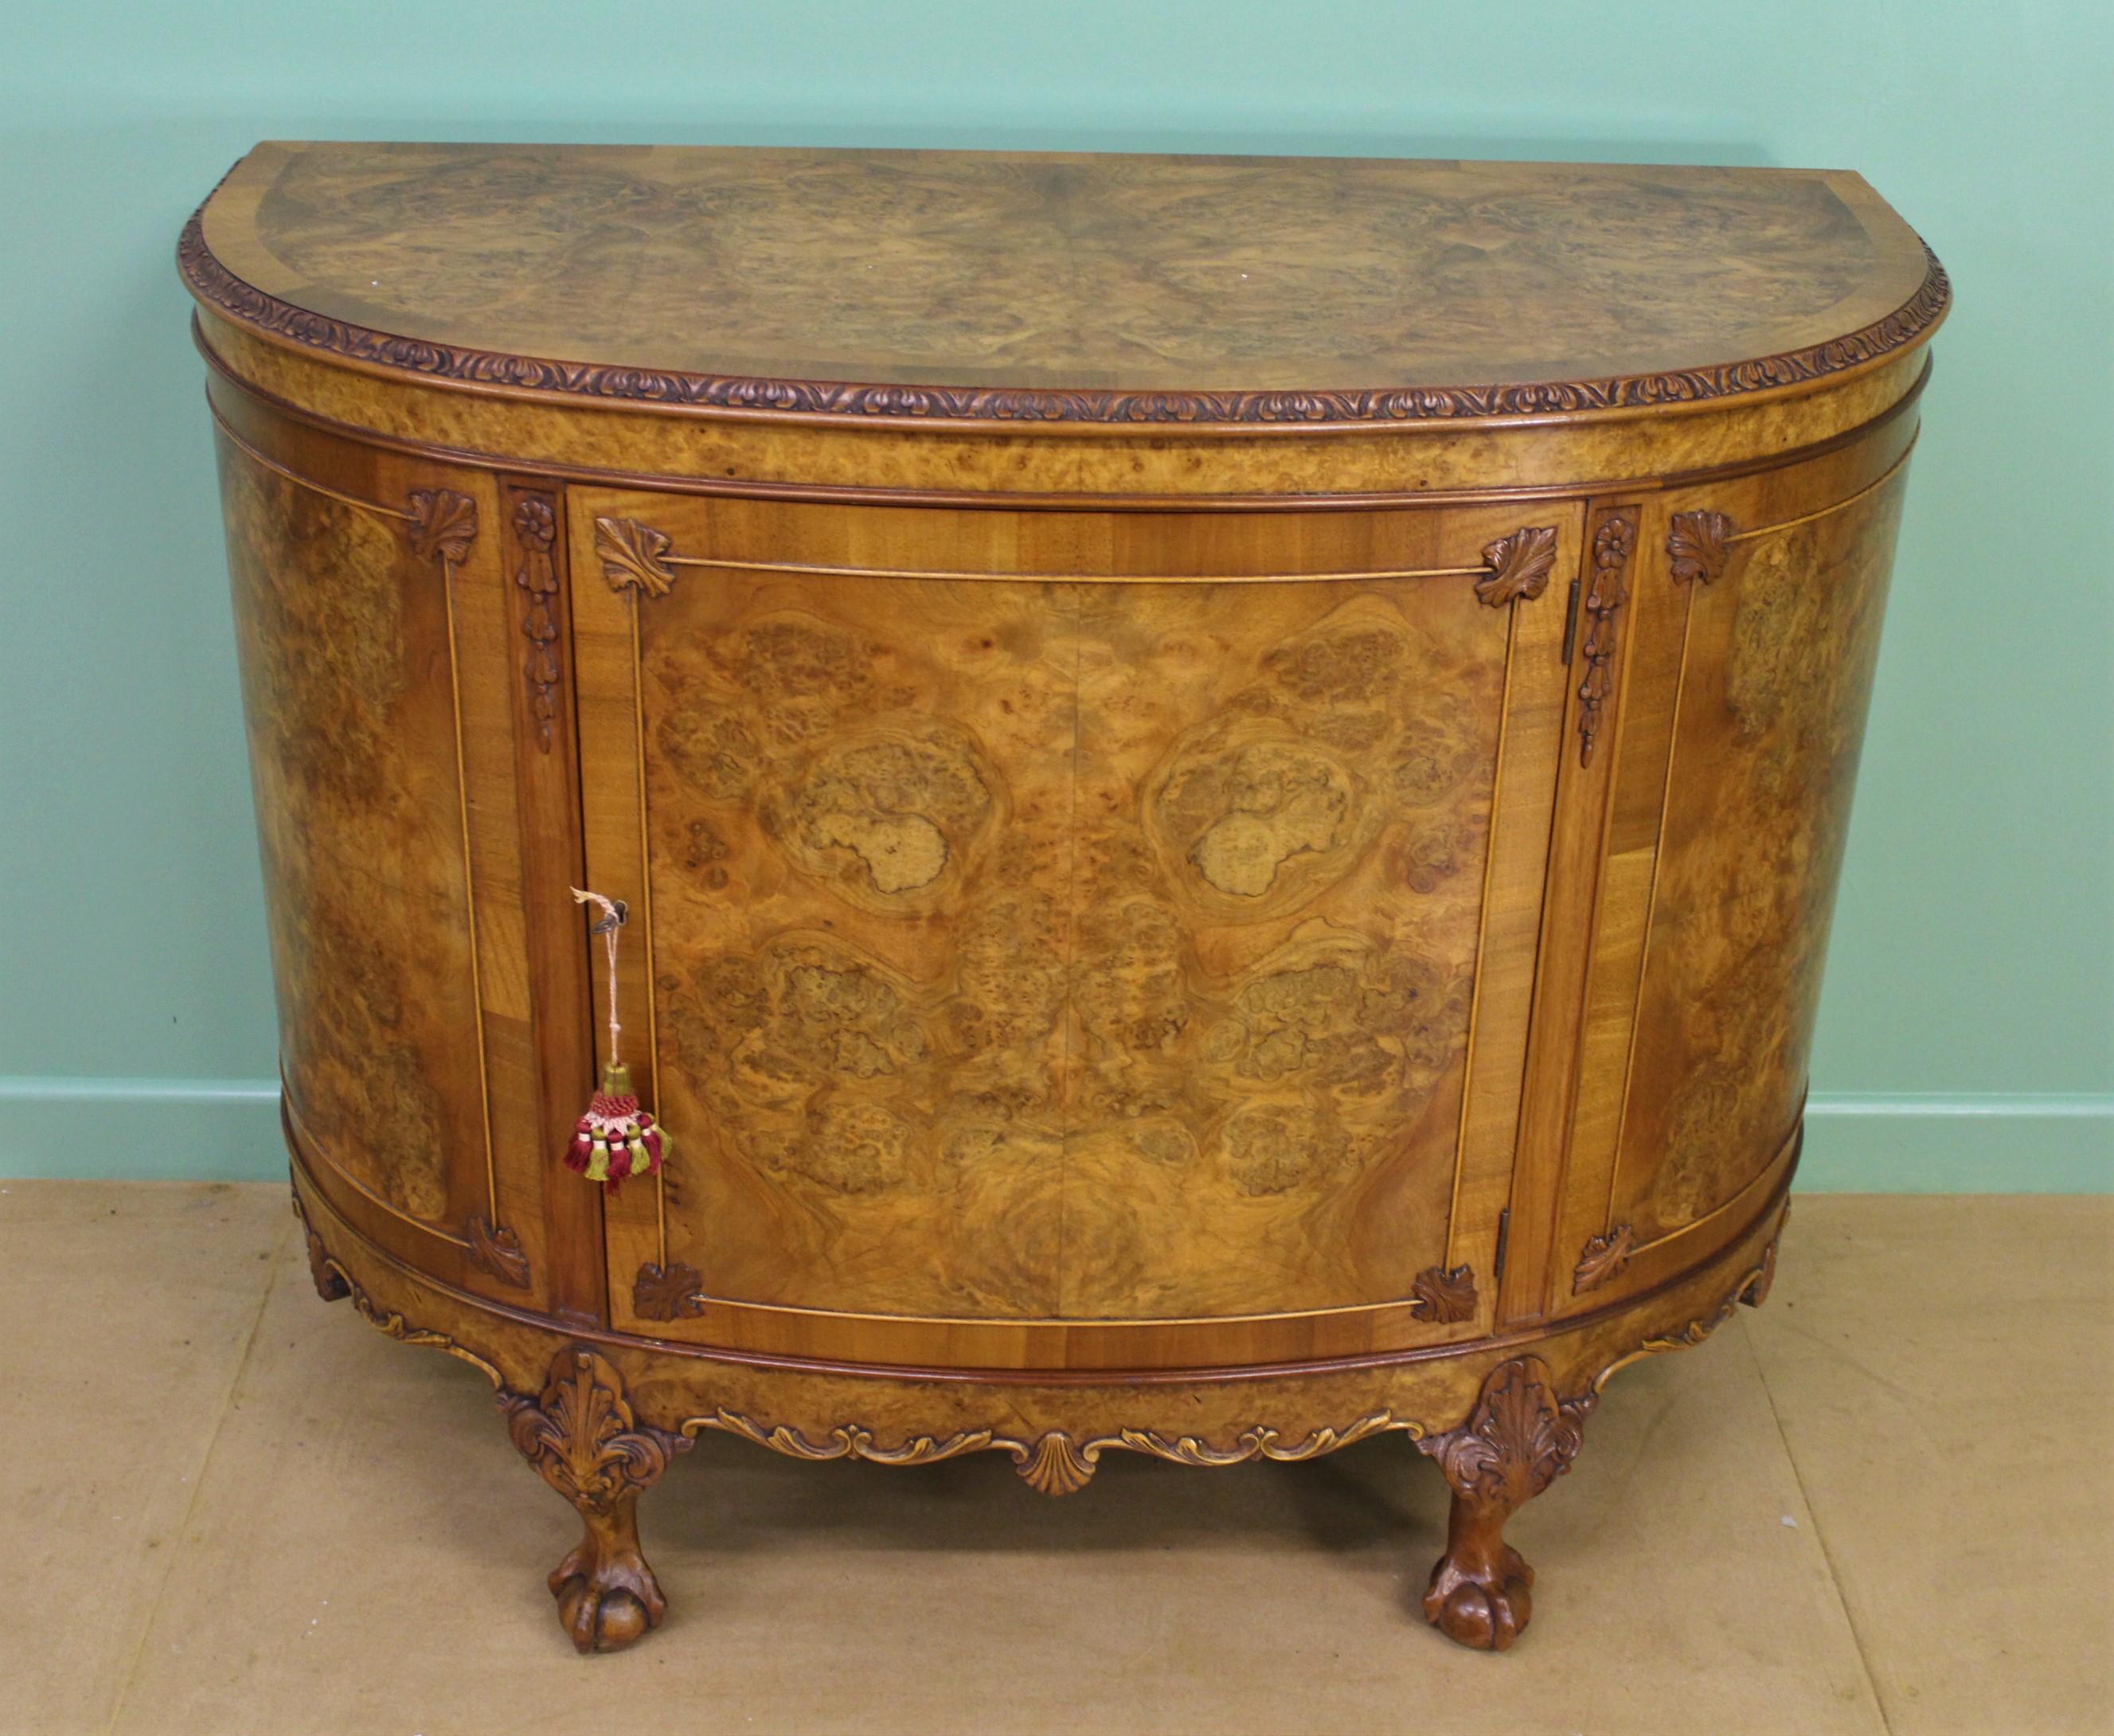 An excellent quality half-moon shaped burr walnut commode, in the Queen Anne style, by Waring and Gillow. Of very good construction in solid walnut with attractive burr walnut veneers. The half-moon shaped top is crossbanded and surrounded with a